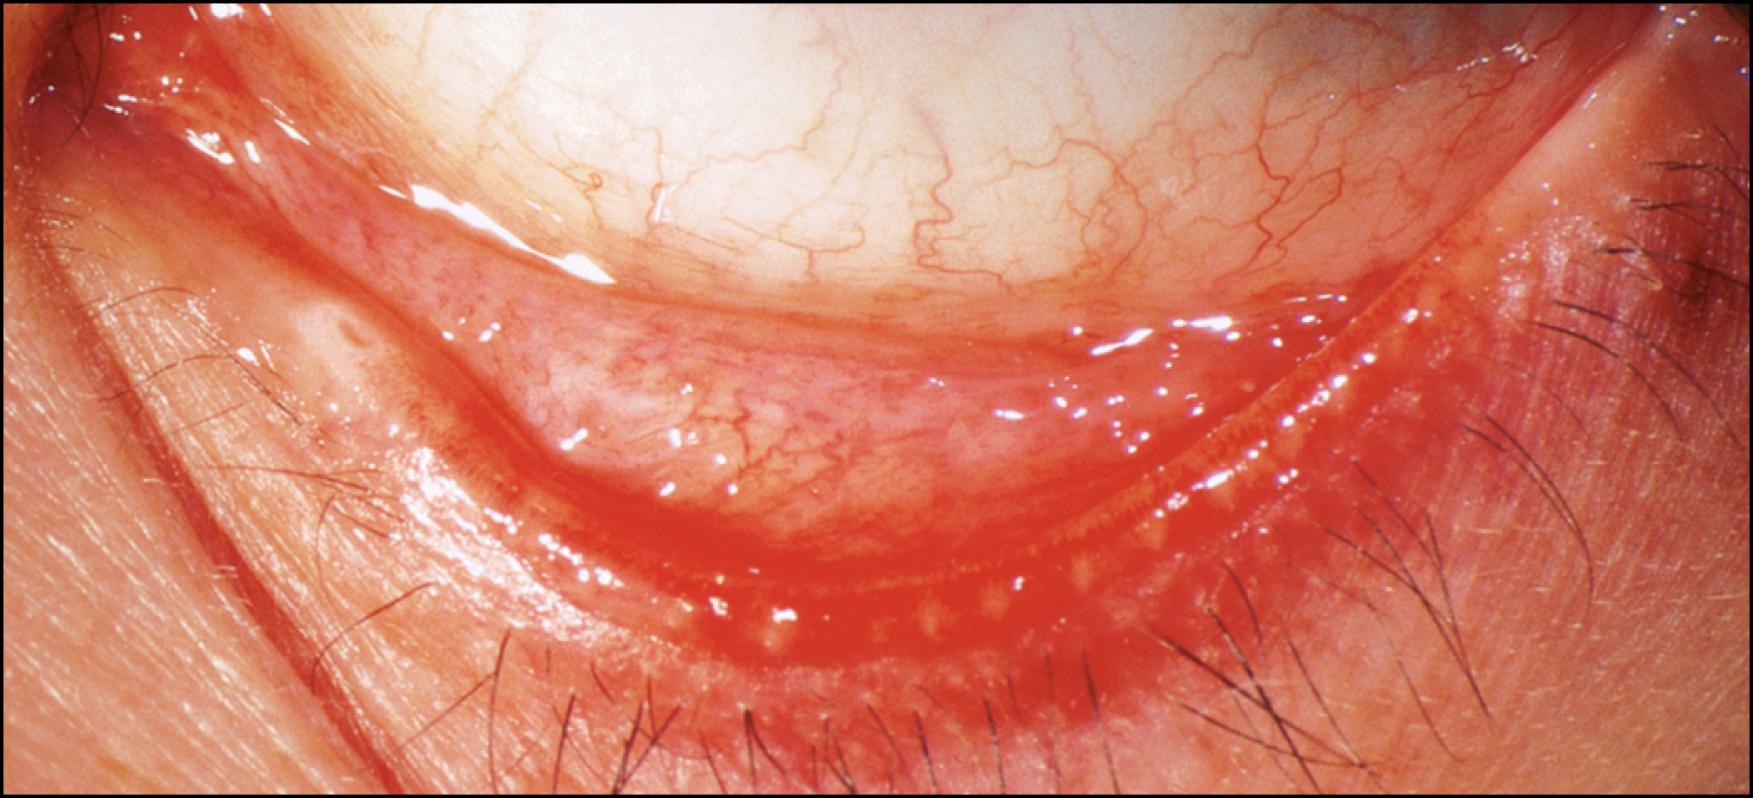 Fig. 64.4, Rosacea: posterior lid inflammation.